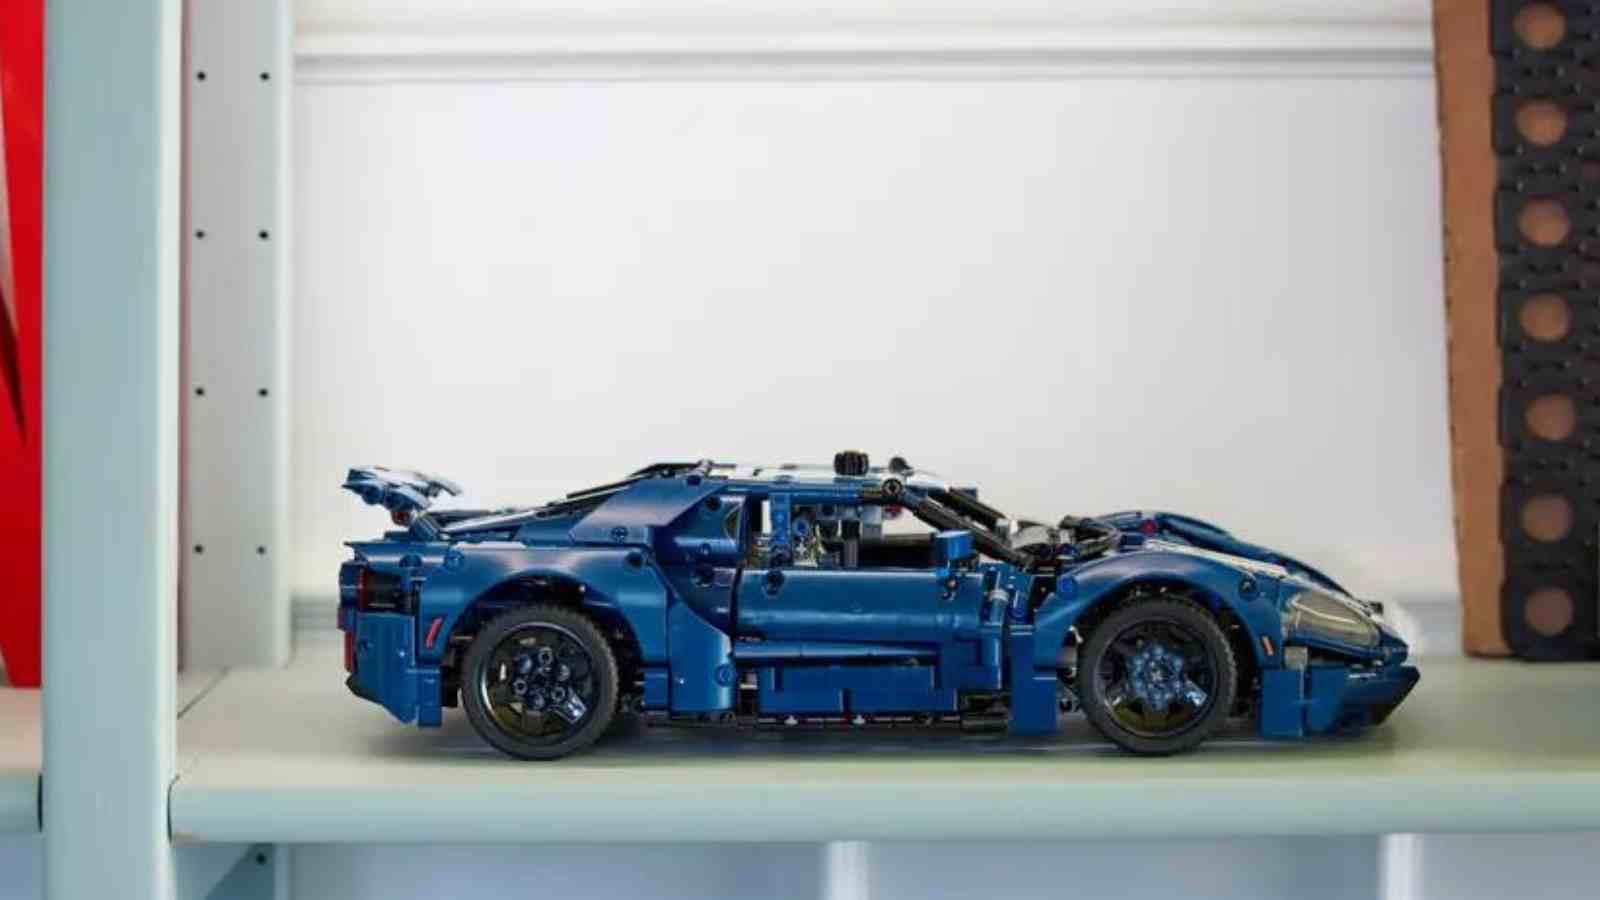 The LEGO Technic Ford GT on display